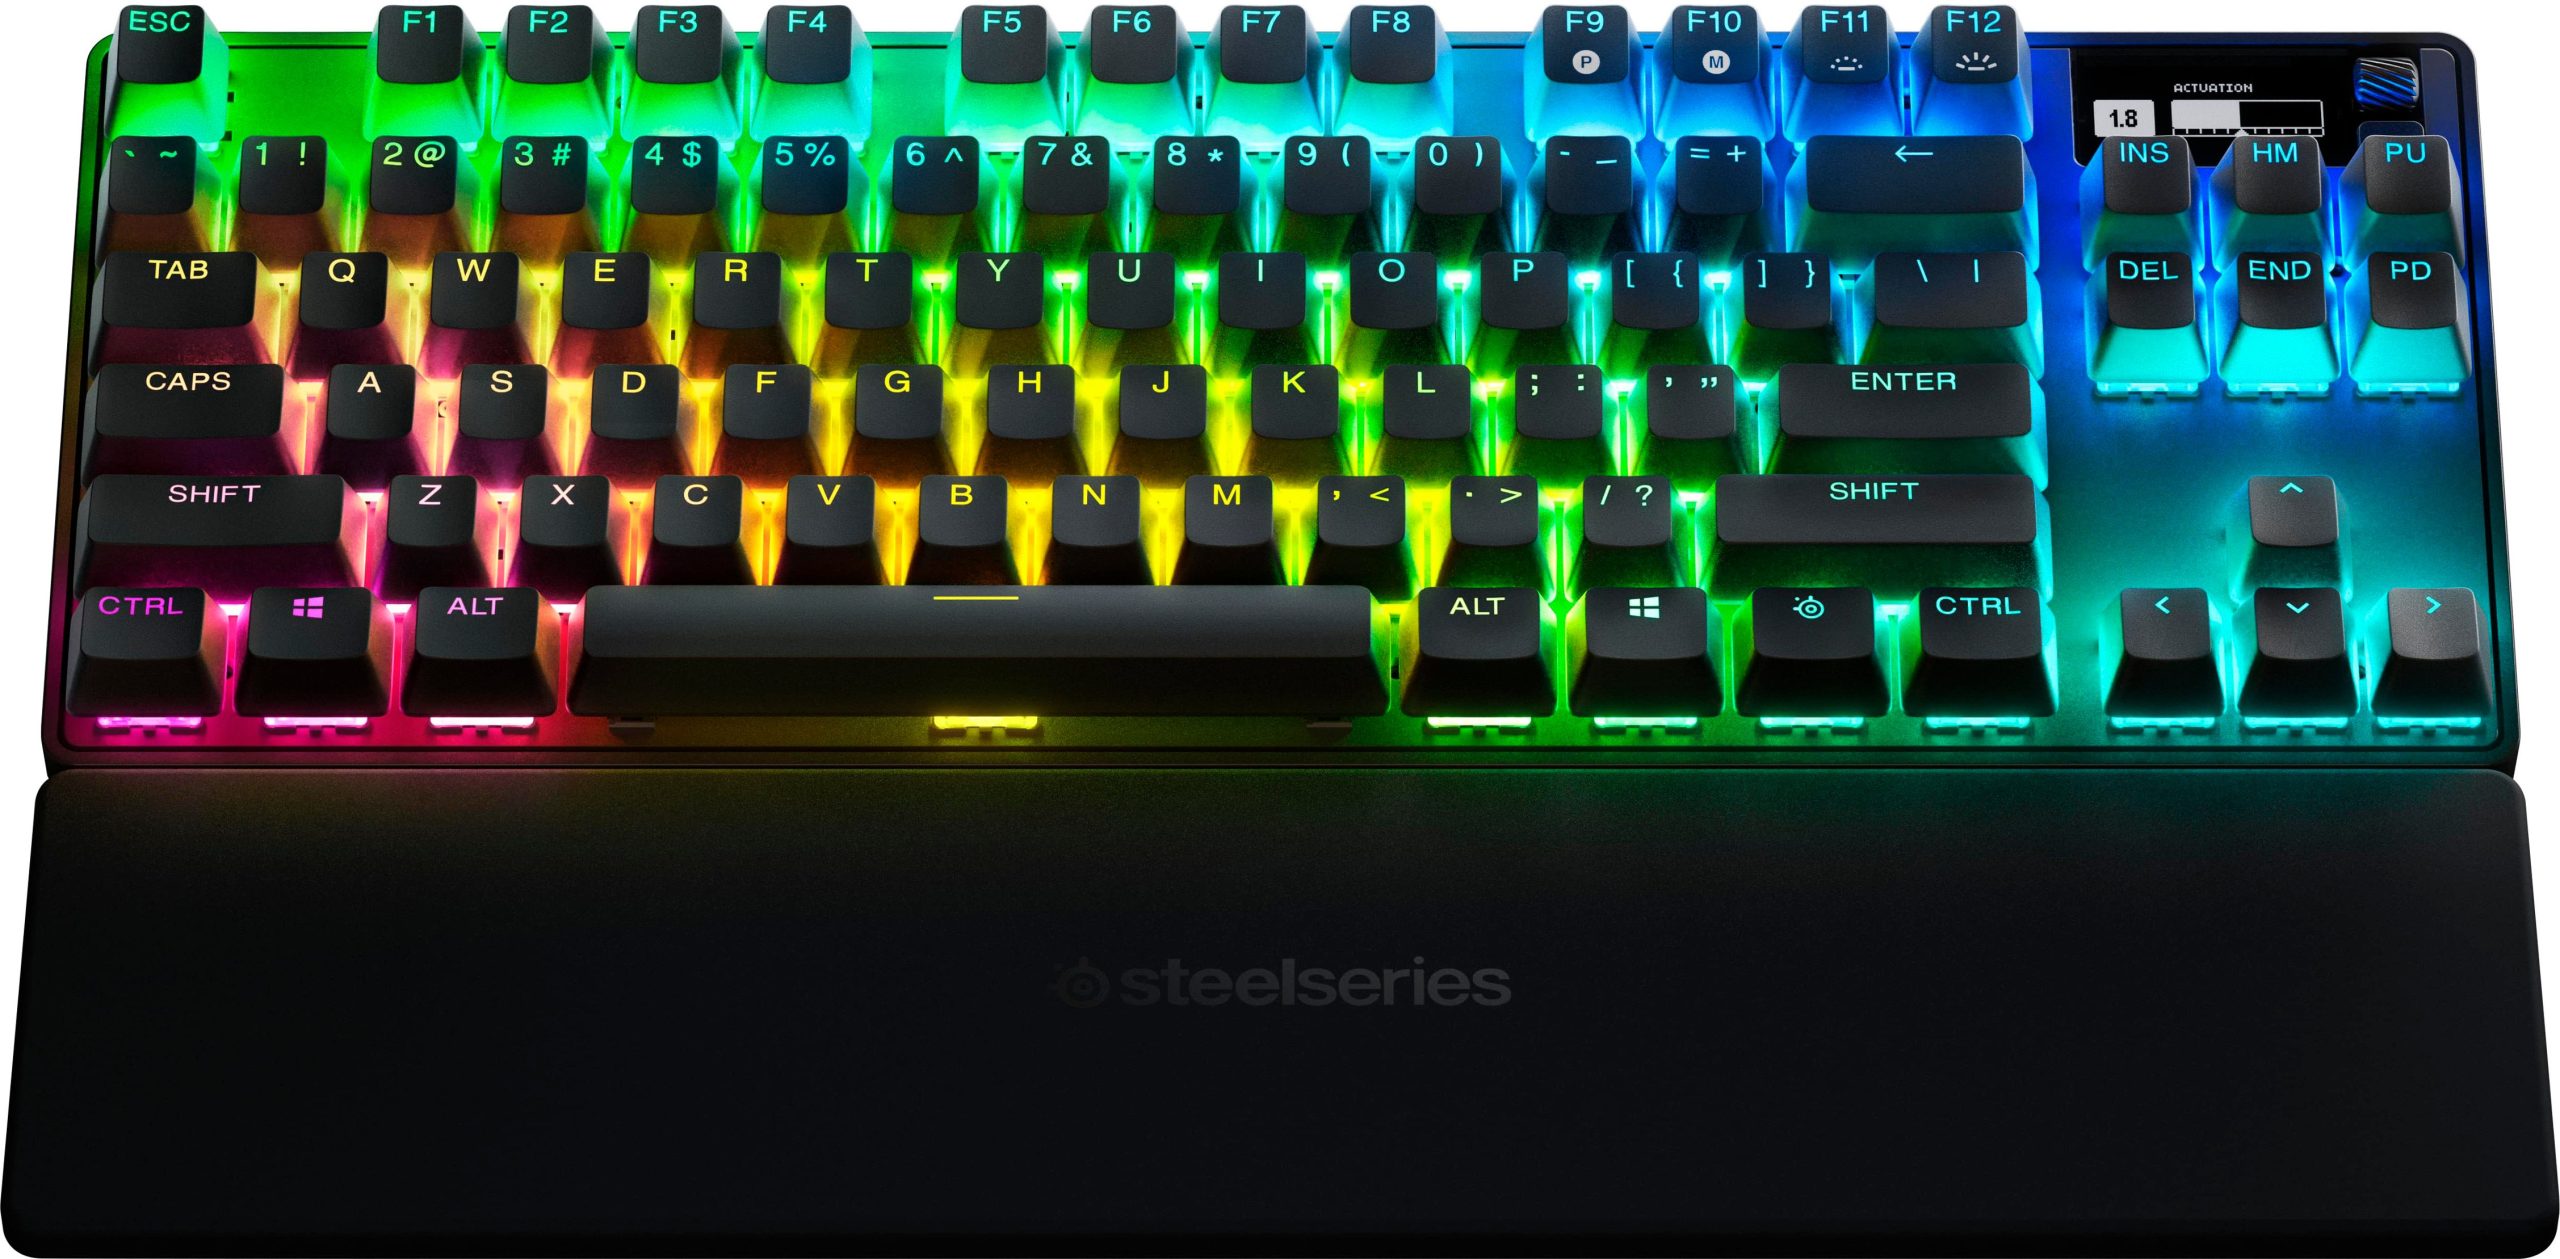 SteelSeries Apex Pro most expensive keyboard